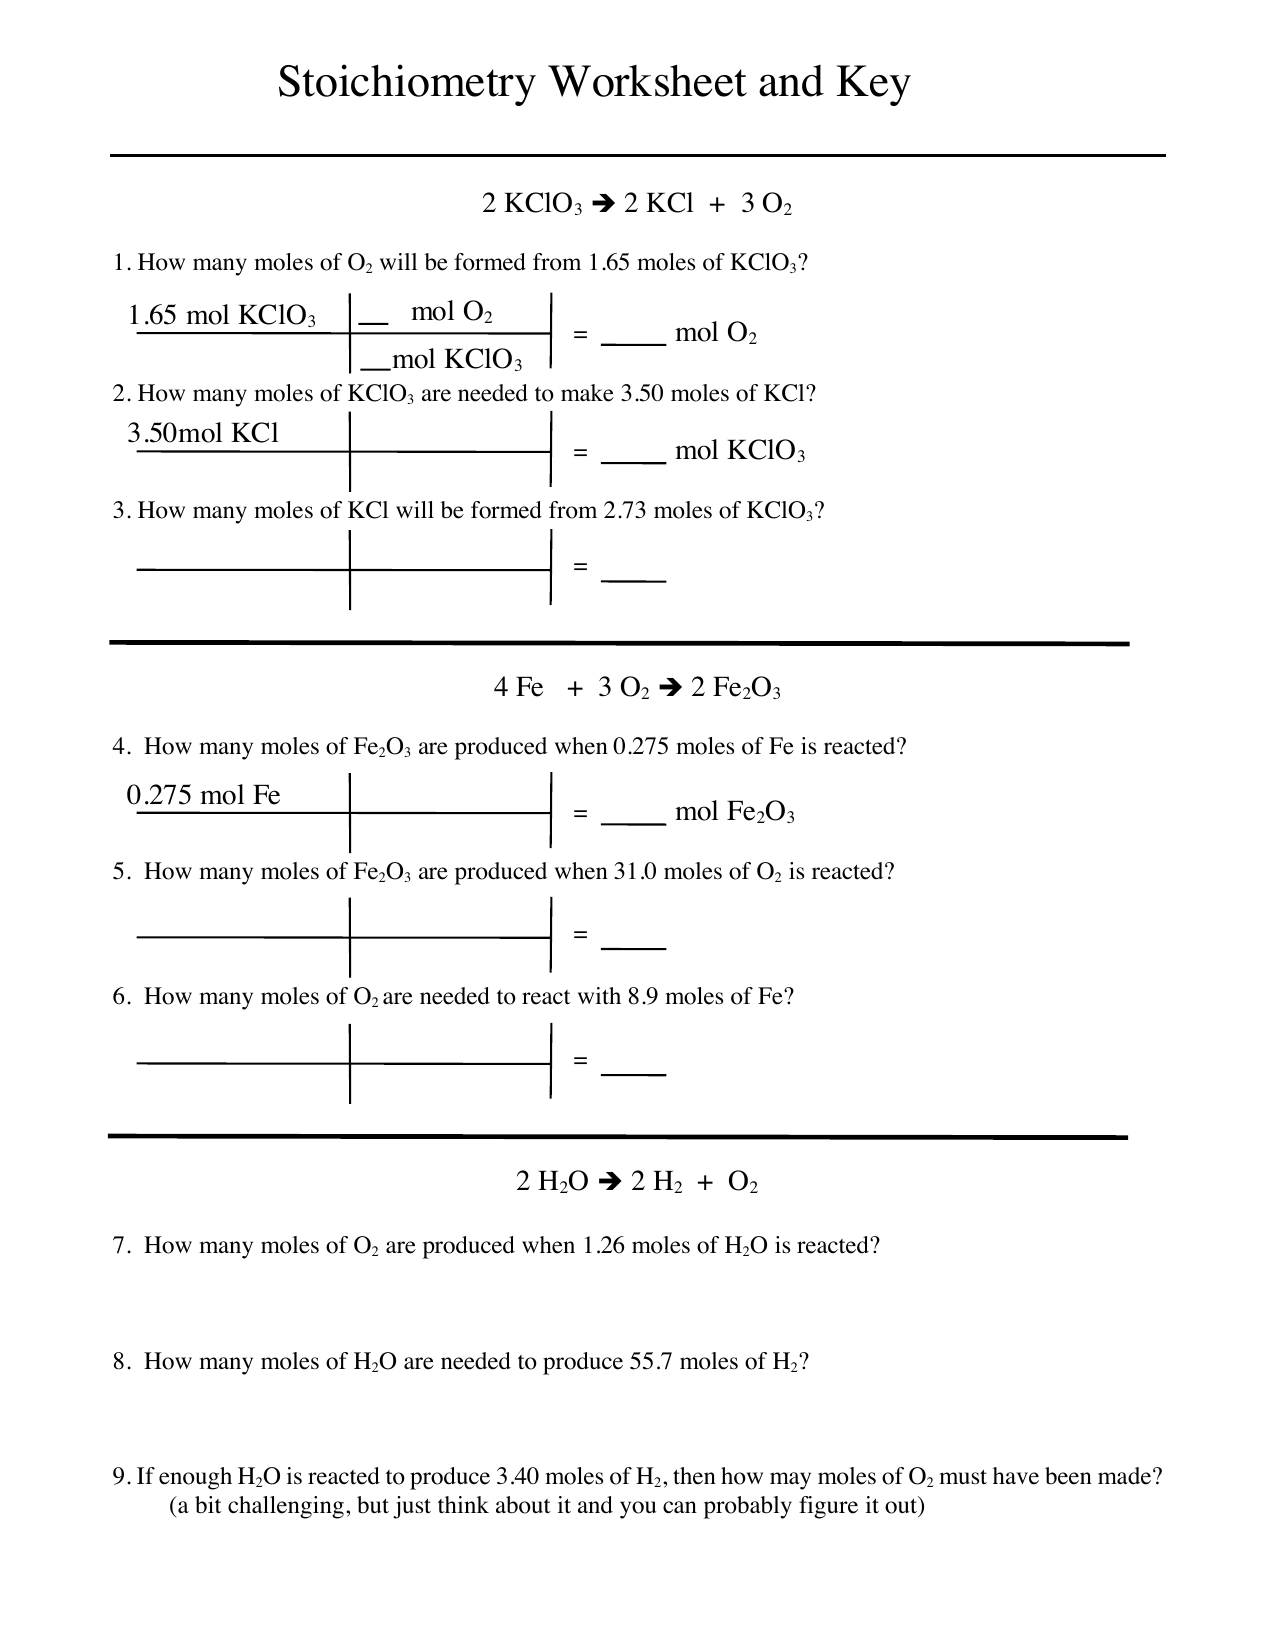 stoichiometry-worksheet-with-answer-key-worksheet